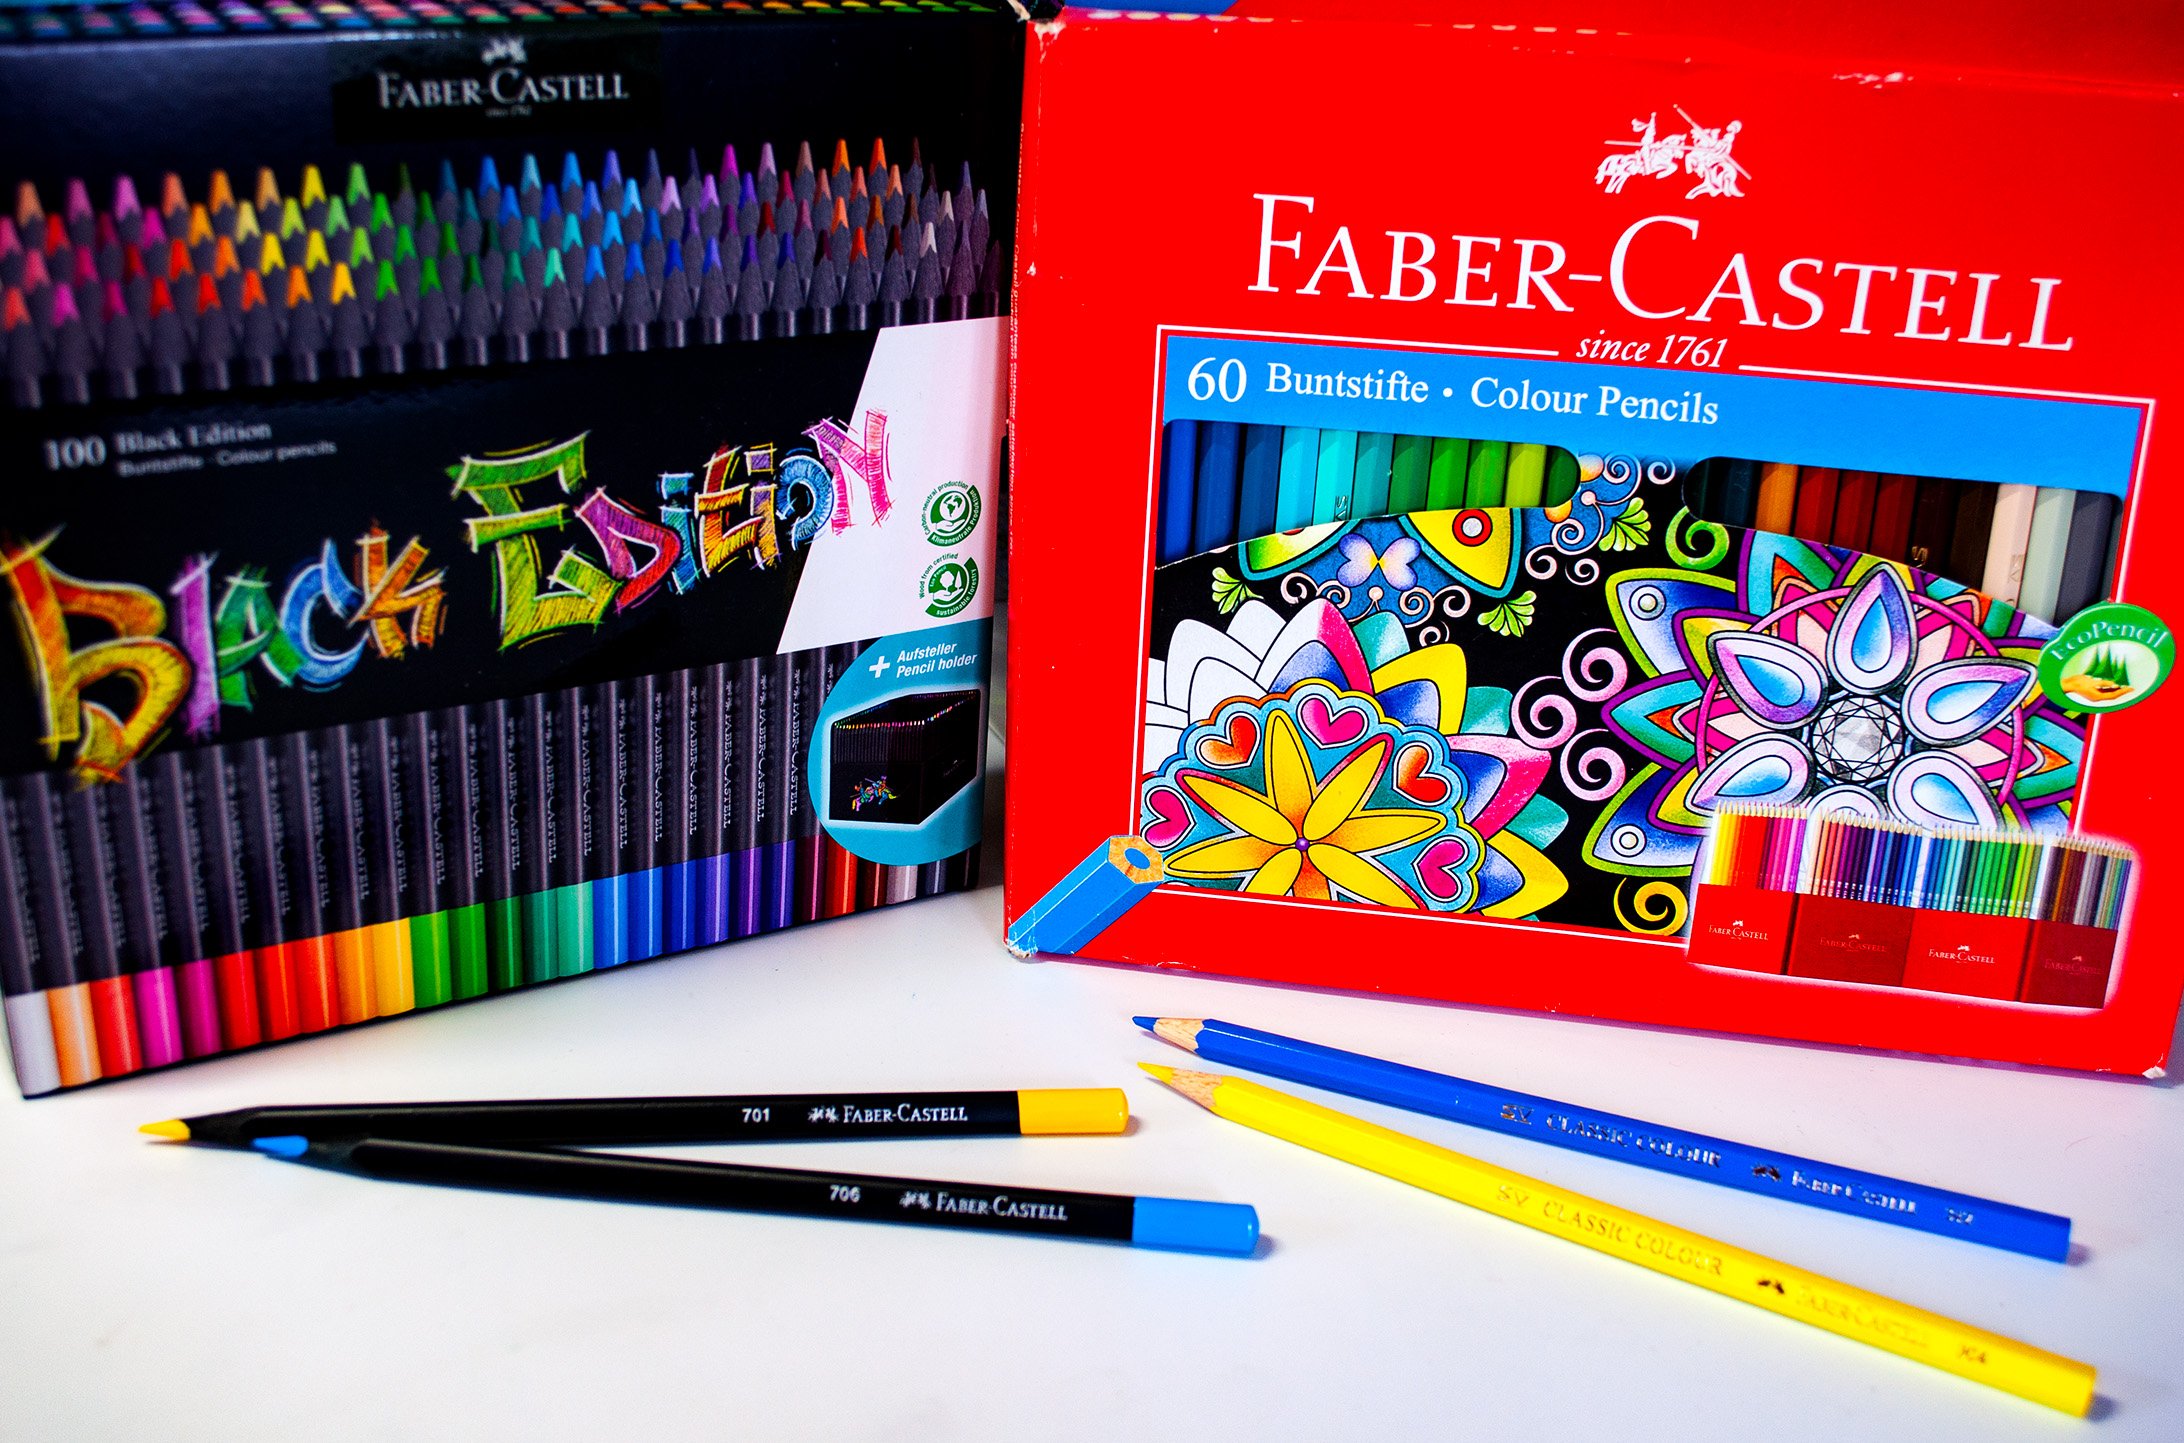 Faber Castell Black Edition Vs Faber Castell Classic Red Colored